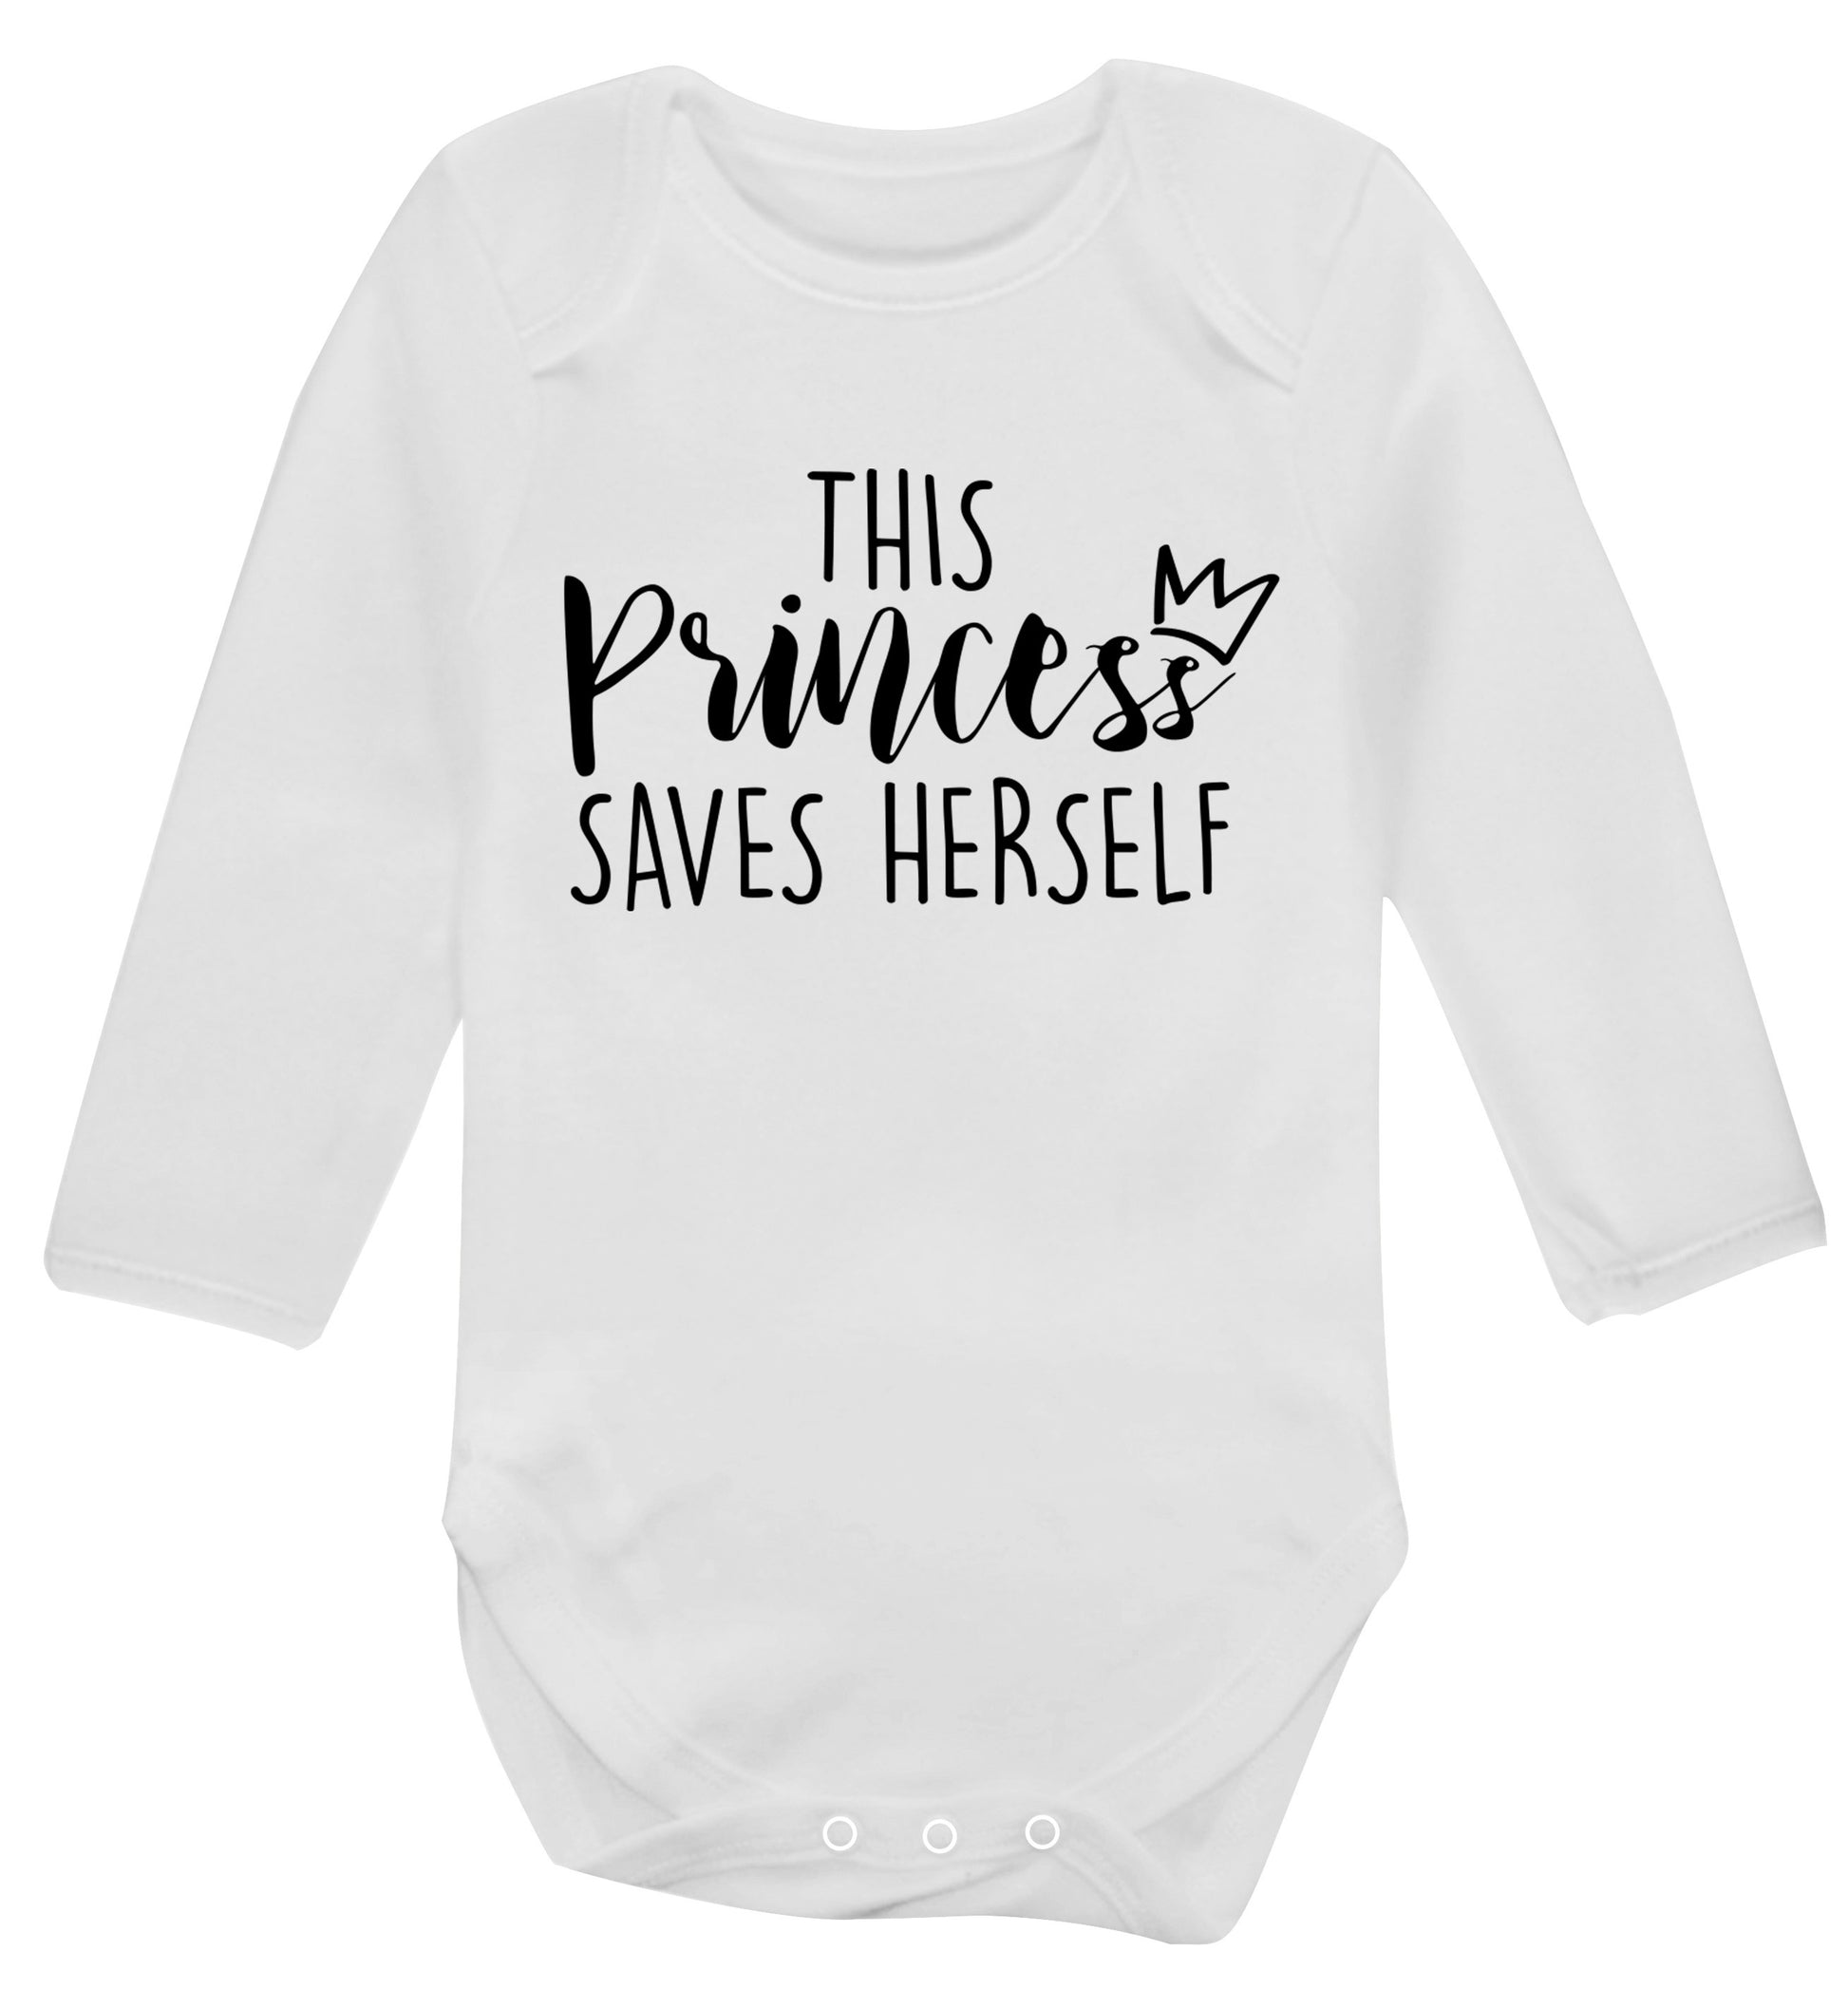 This princess saves herself Baby Vest long sleeved white 6-12 months